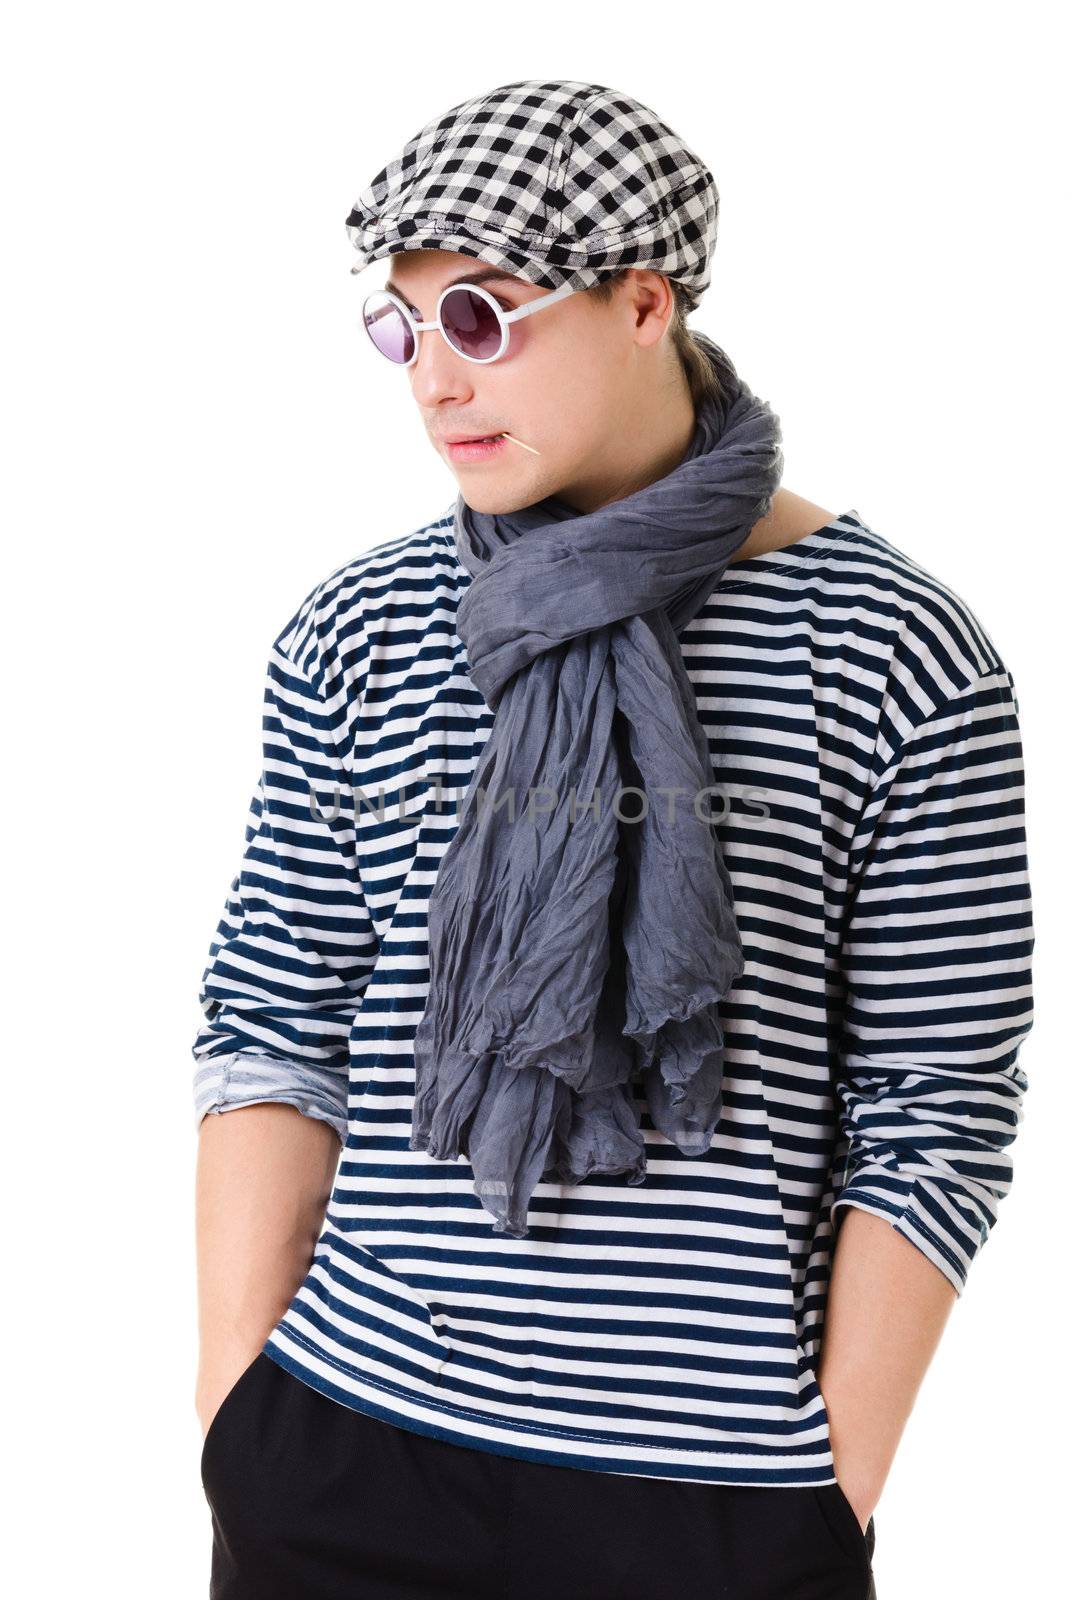 Young retro stylish man in striped clothes, glasses and hat isolated on white background